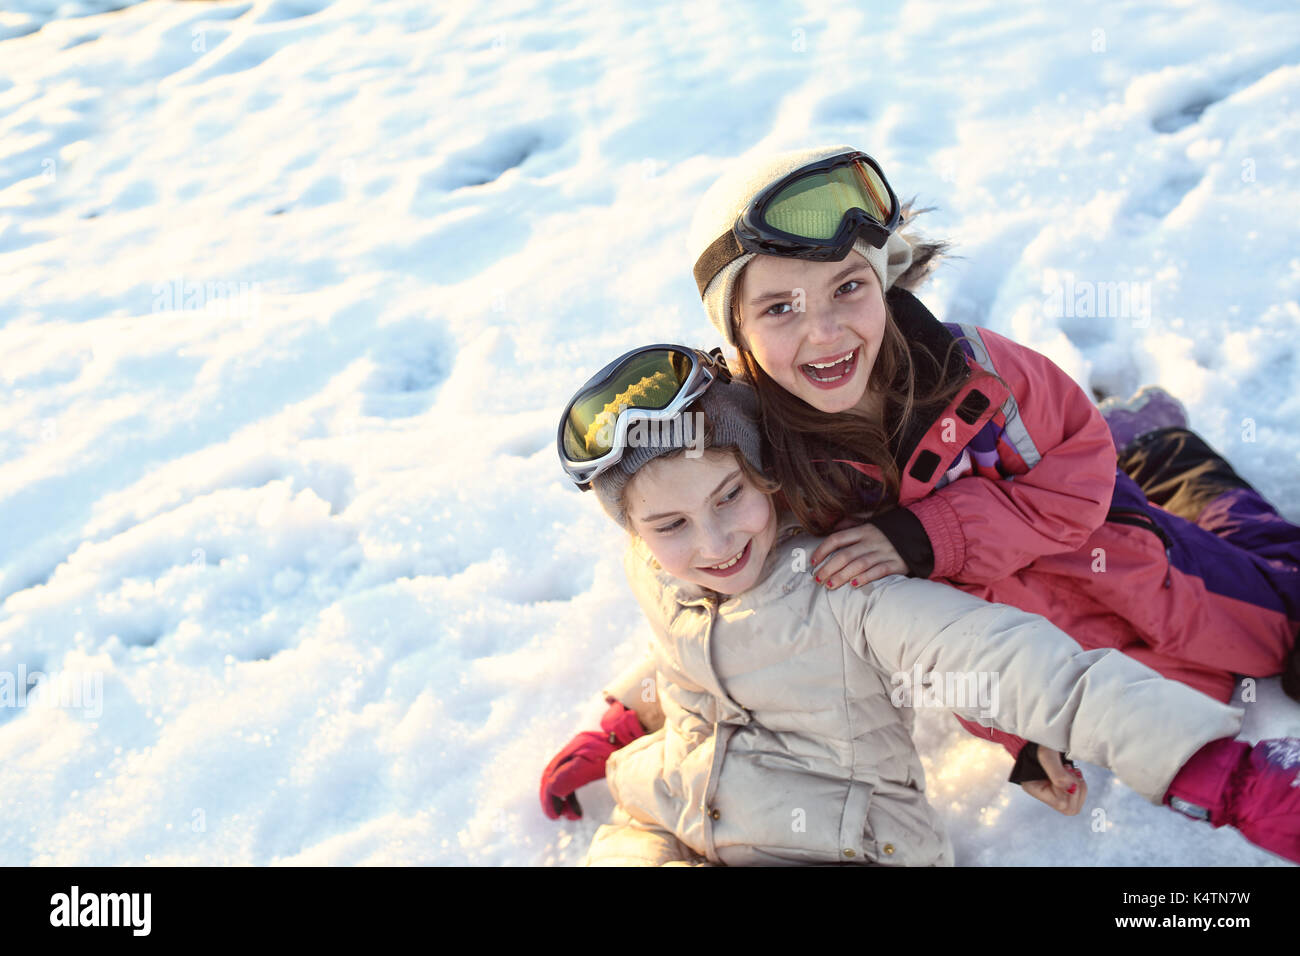 Young happy girls have fun on a winter sunny day Stock Photo